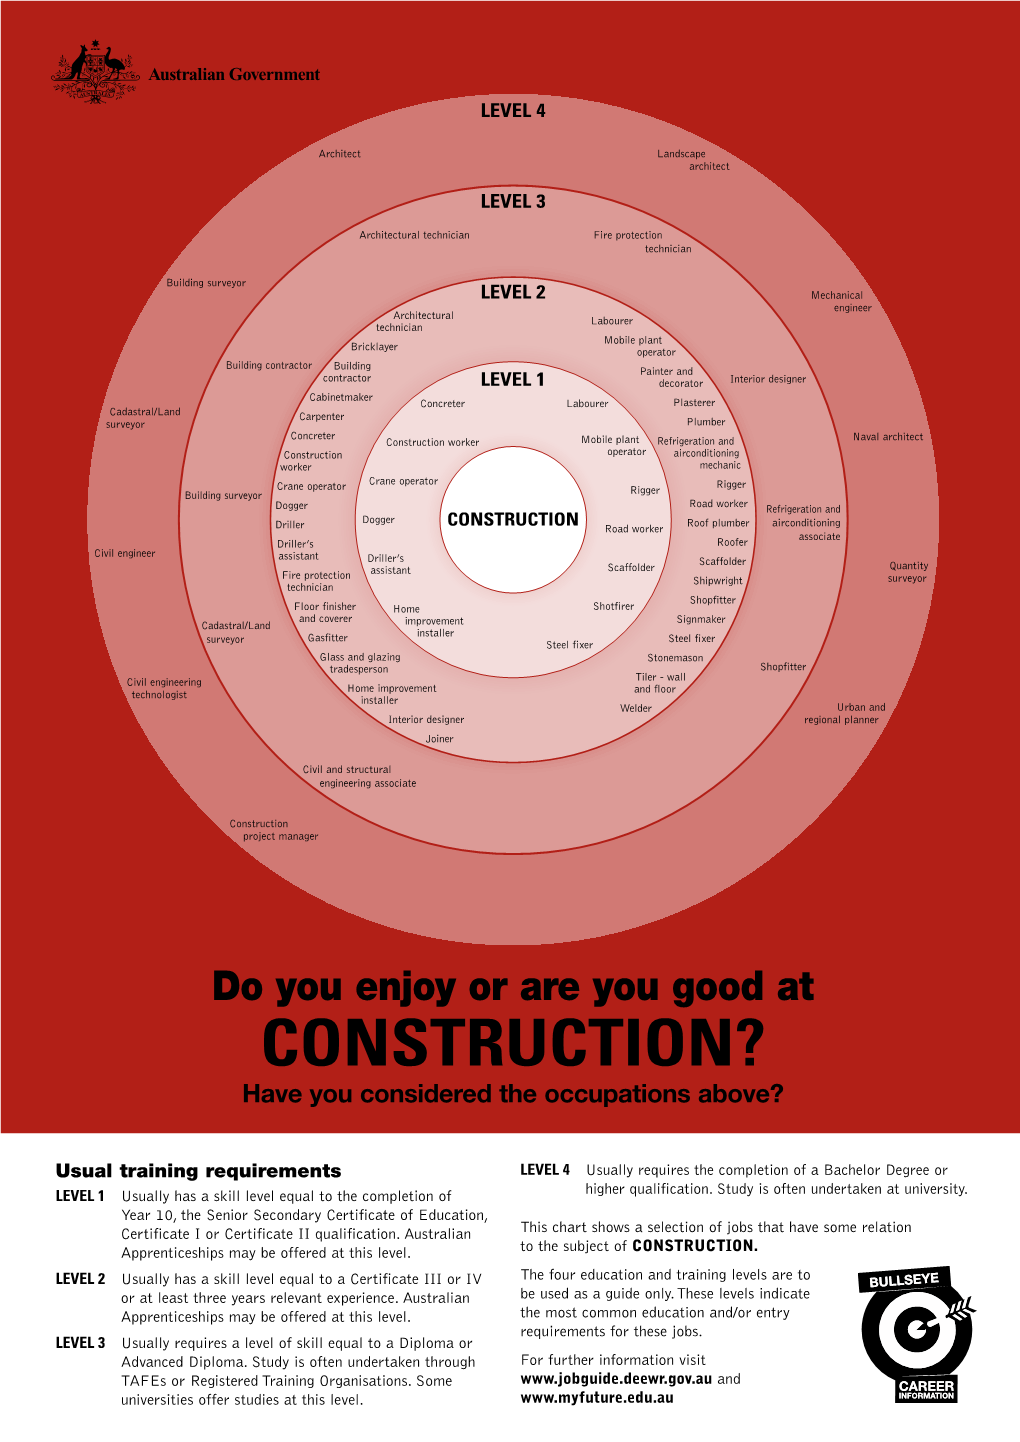 CONSTRUCTION? Have You Considered the Occupations Above?